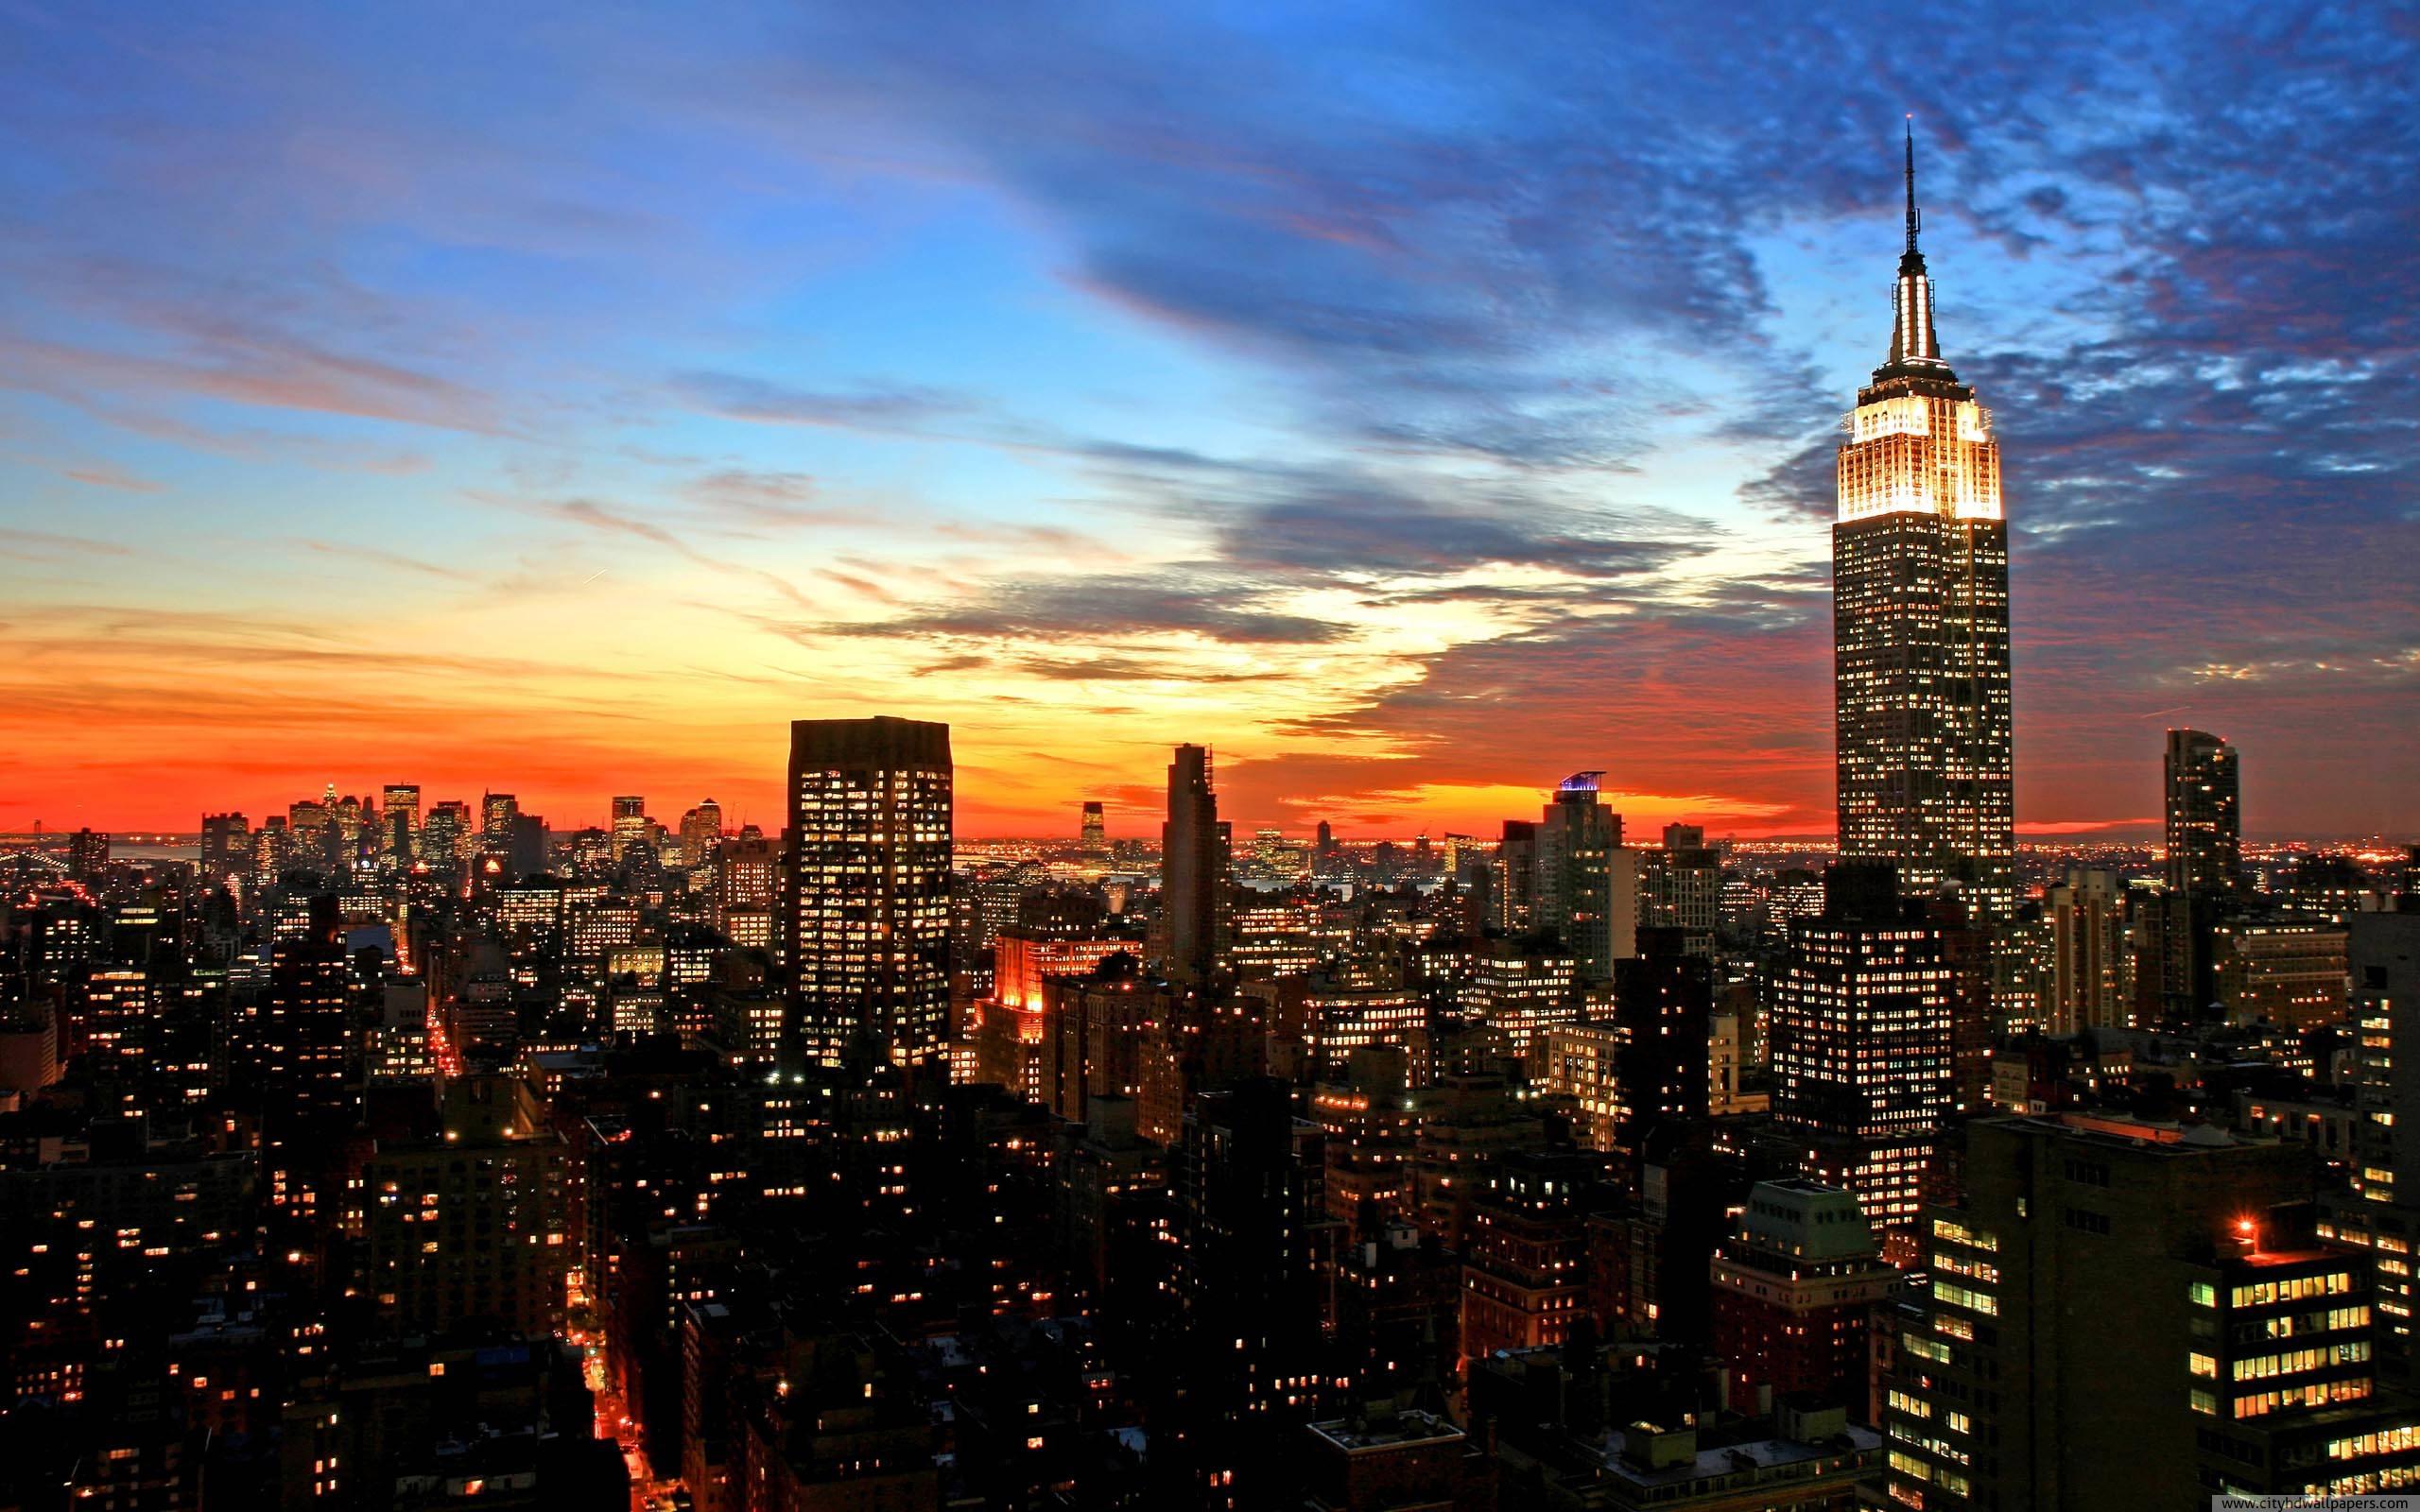 night light of new york in new york usa city hd wallpaper more about